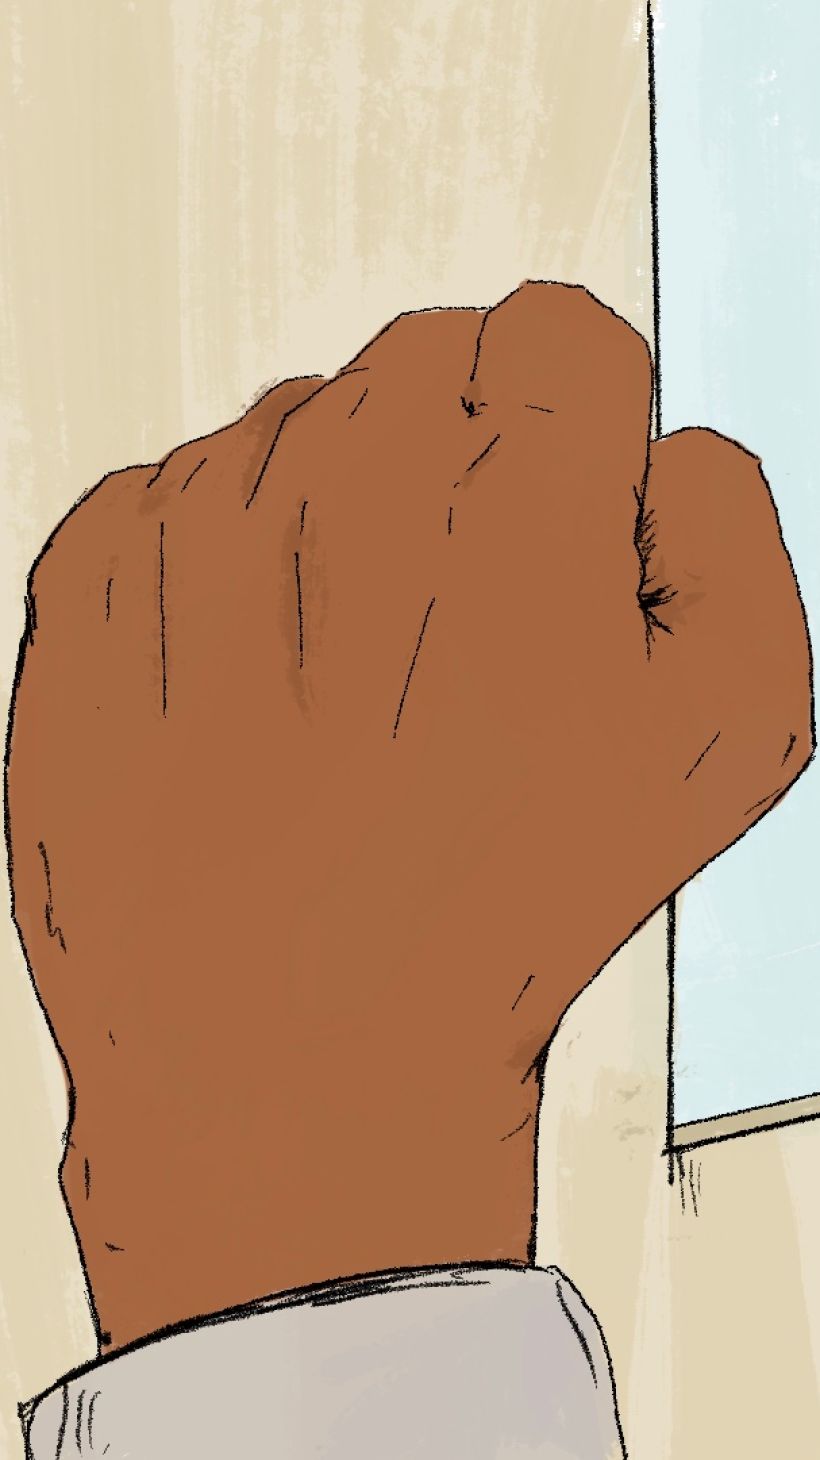 An illustration of a person who is a prisoner's fist banging on a door.